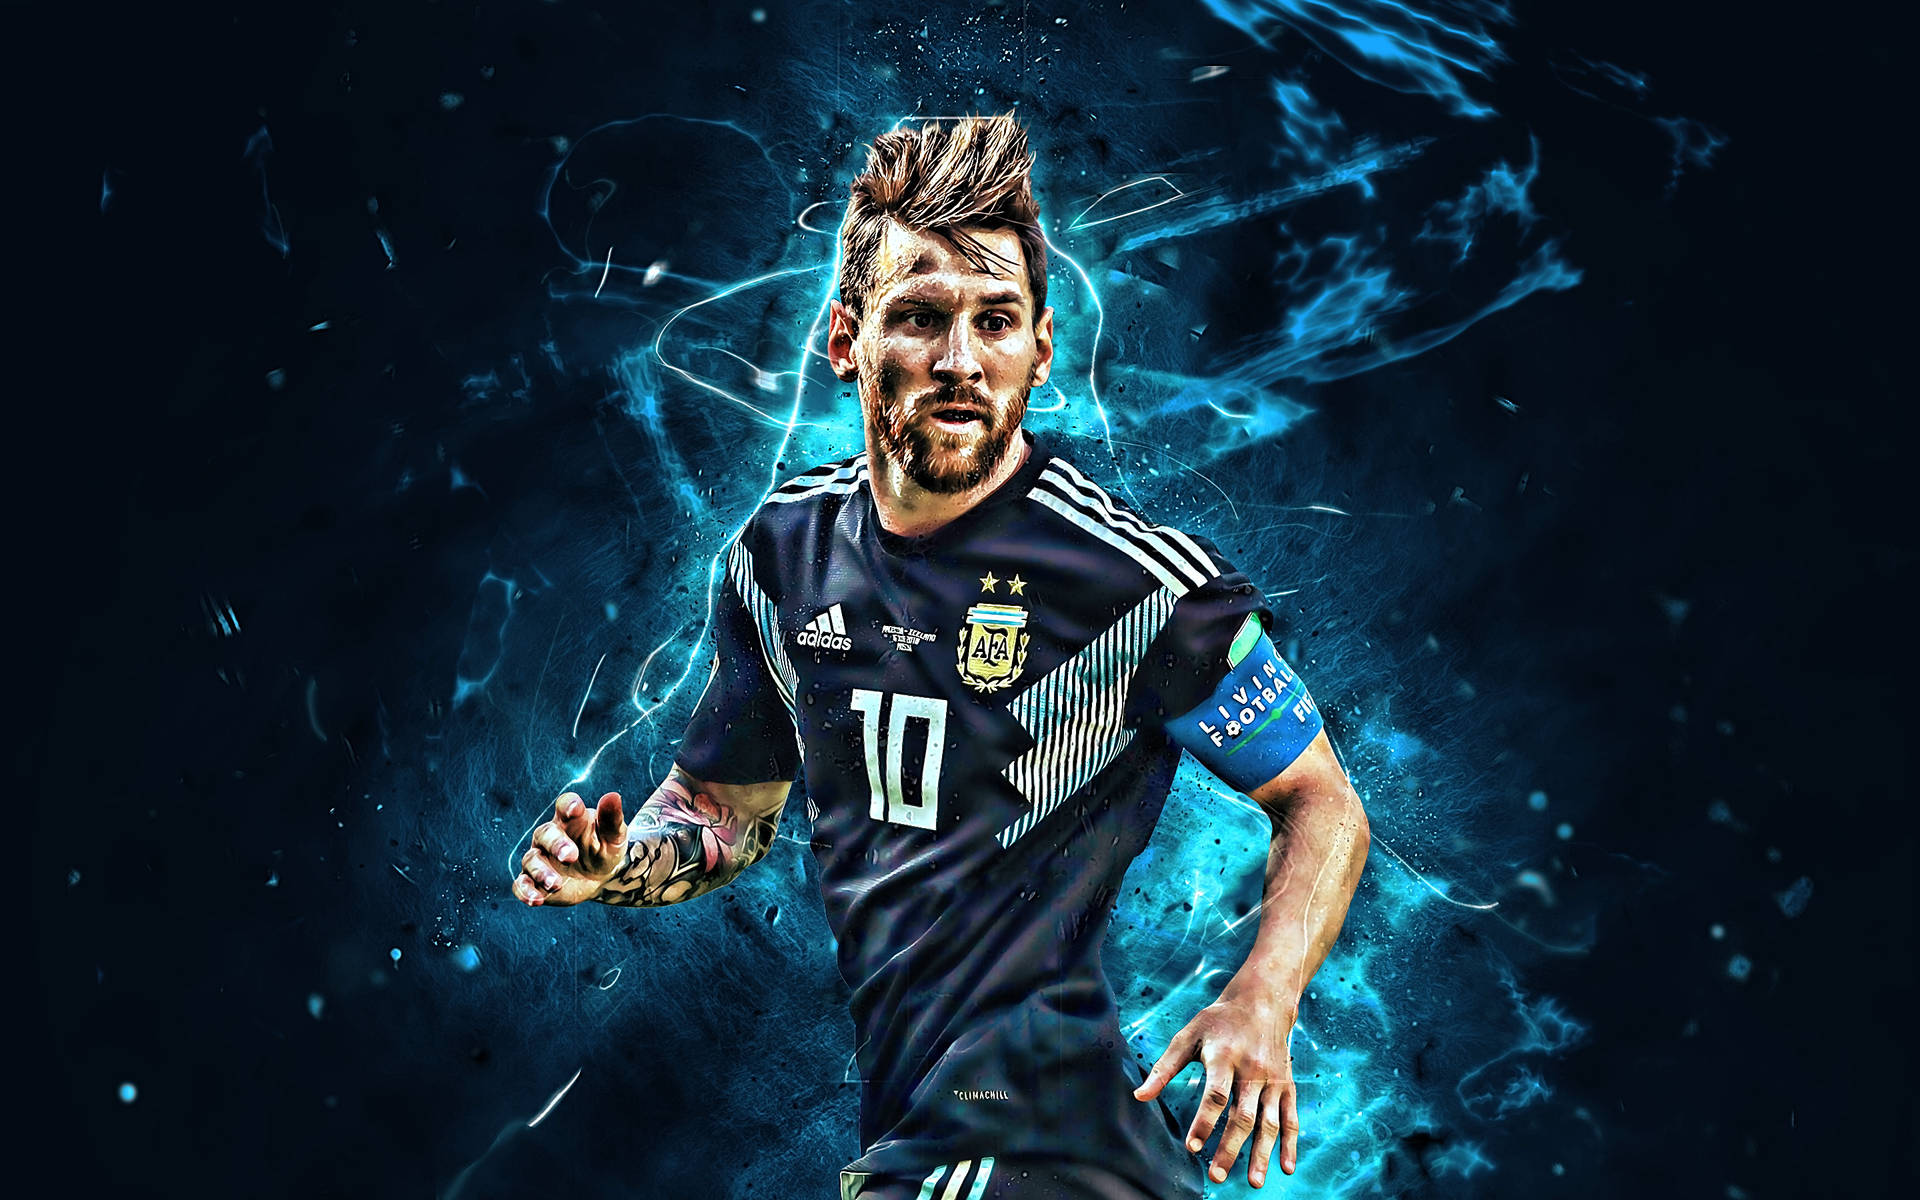 Lionel Messi 2020 With Mohawk Haircut Background